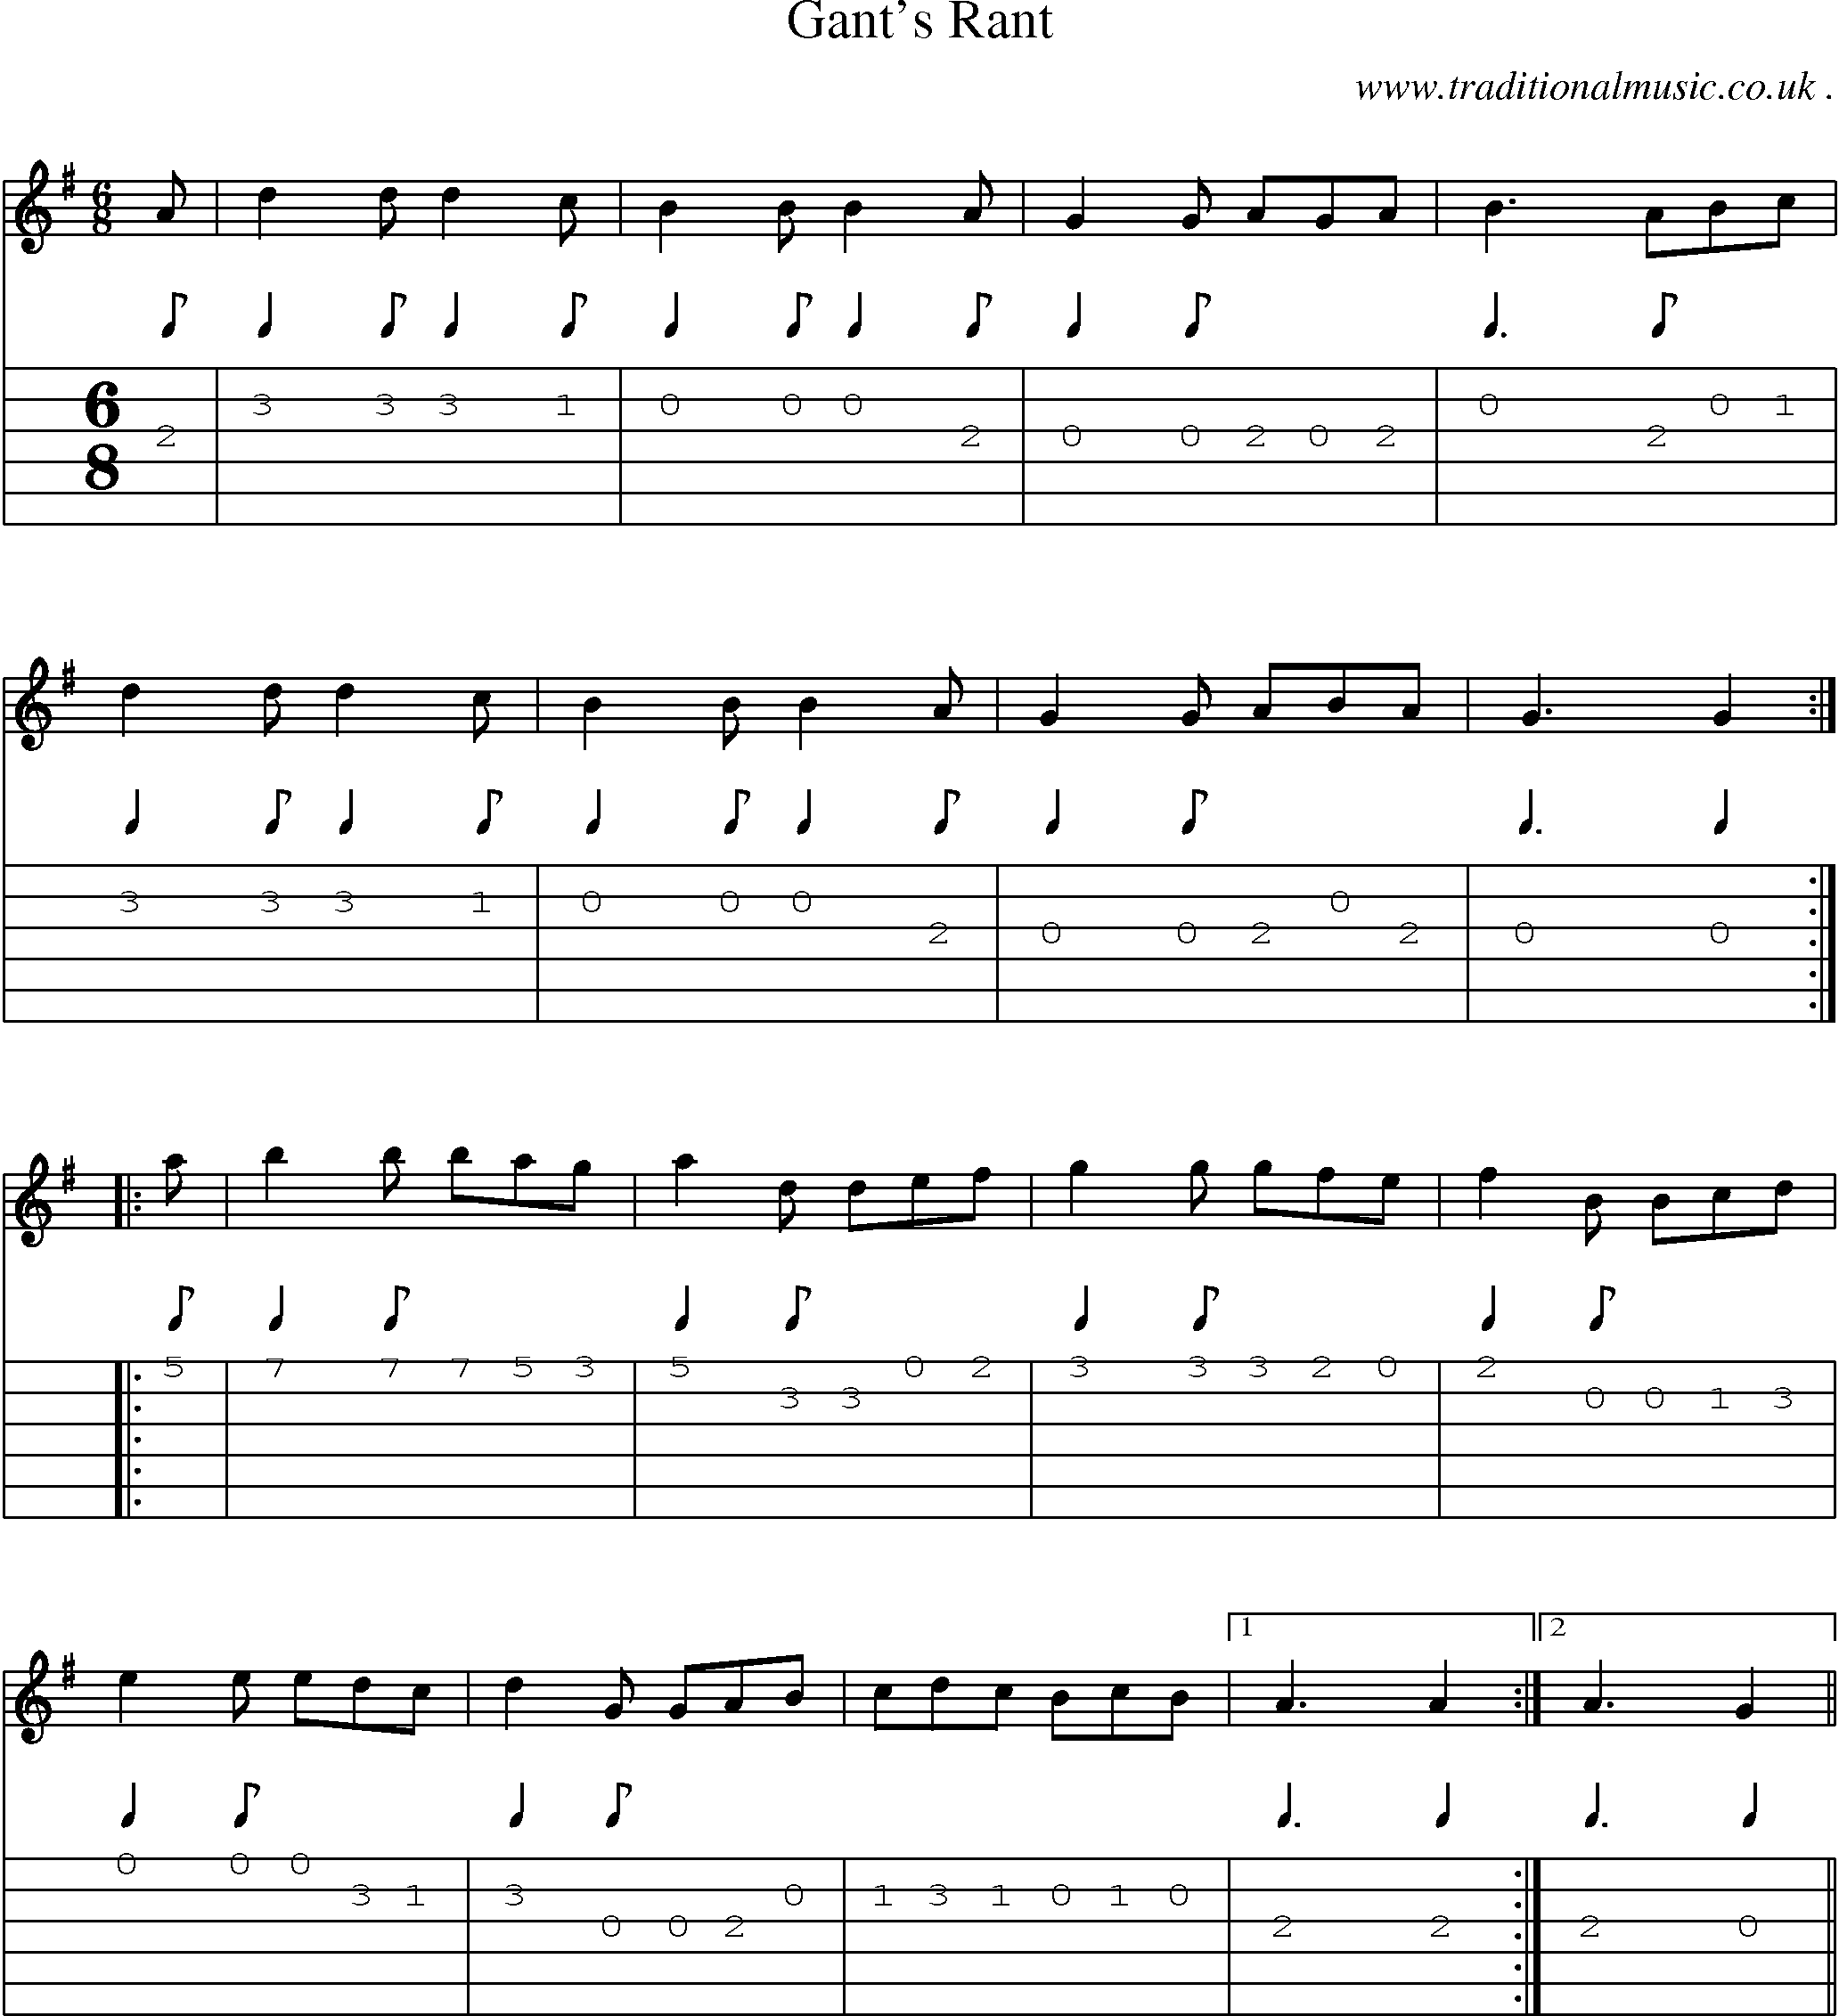 Sheet-Music and Guitar Tabs for Gants Rant